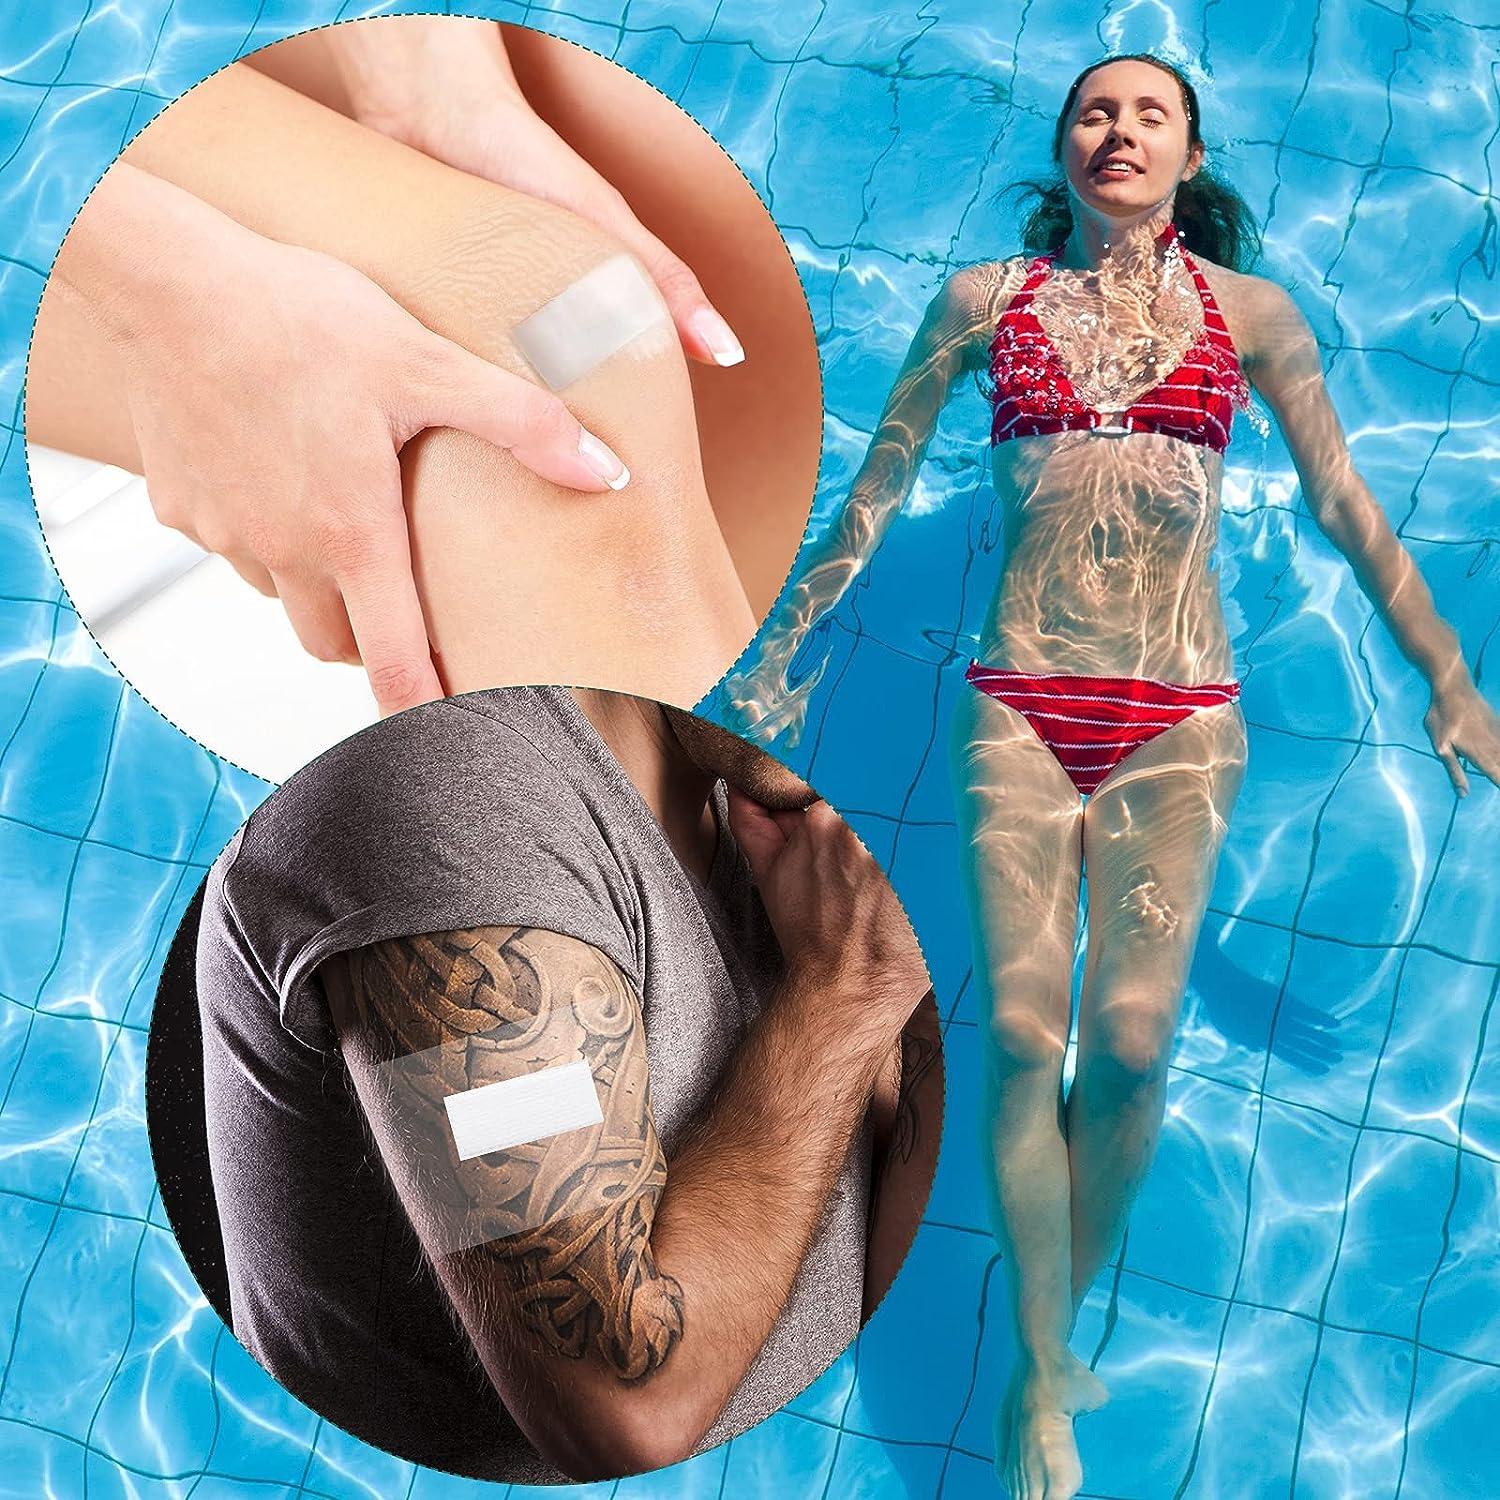 BBTO 100 Pieces Transparent Stretch Adhesive Bandage Waterproof Clear  Protective Shower Patch Film Cover Bandages Tattoo Aftercare Wrap, 4 Sizes  (2